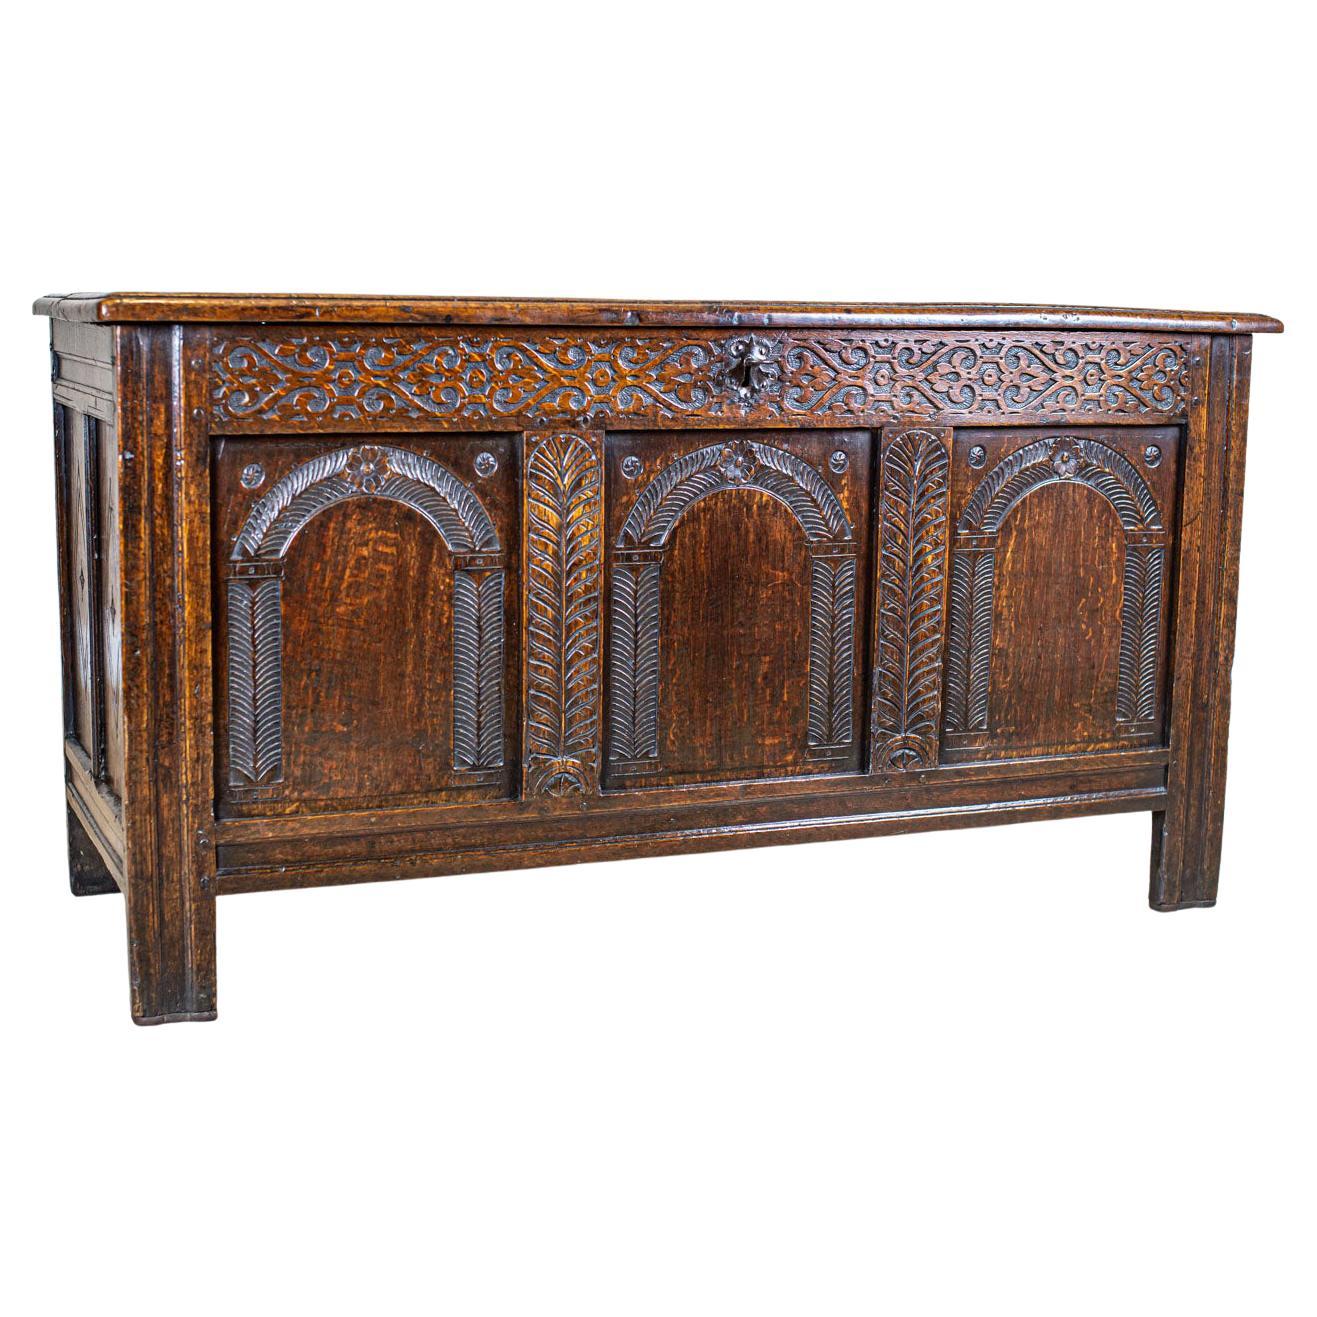 19th-Century Oak Cassone in Carved Floral Patterns